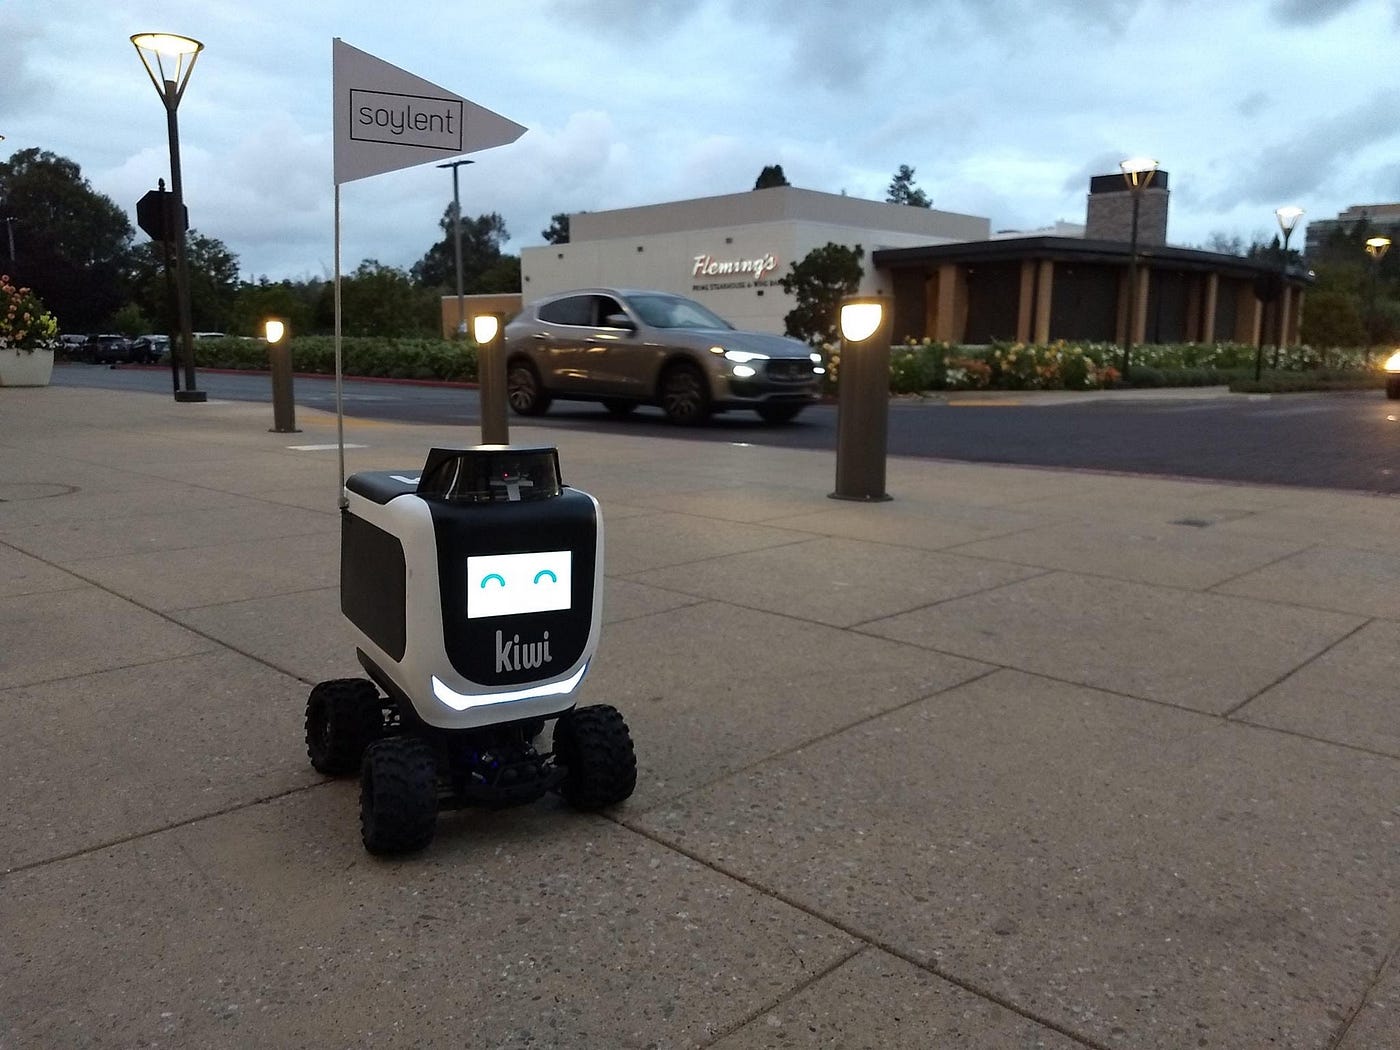 Why Do I Want to Kick Those Cute Little Food-Delivery Robots? | by Jessica  Lynn | The Bold Italic